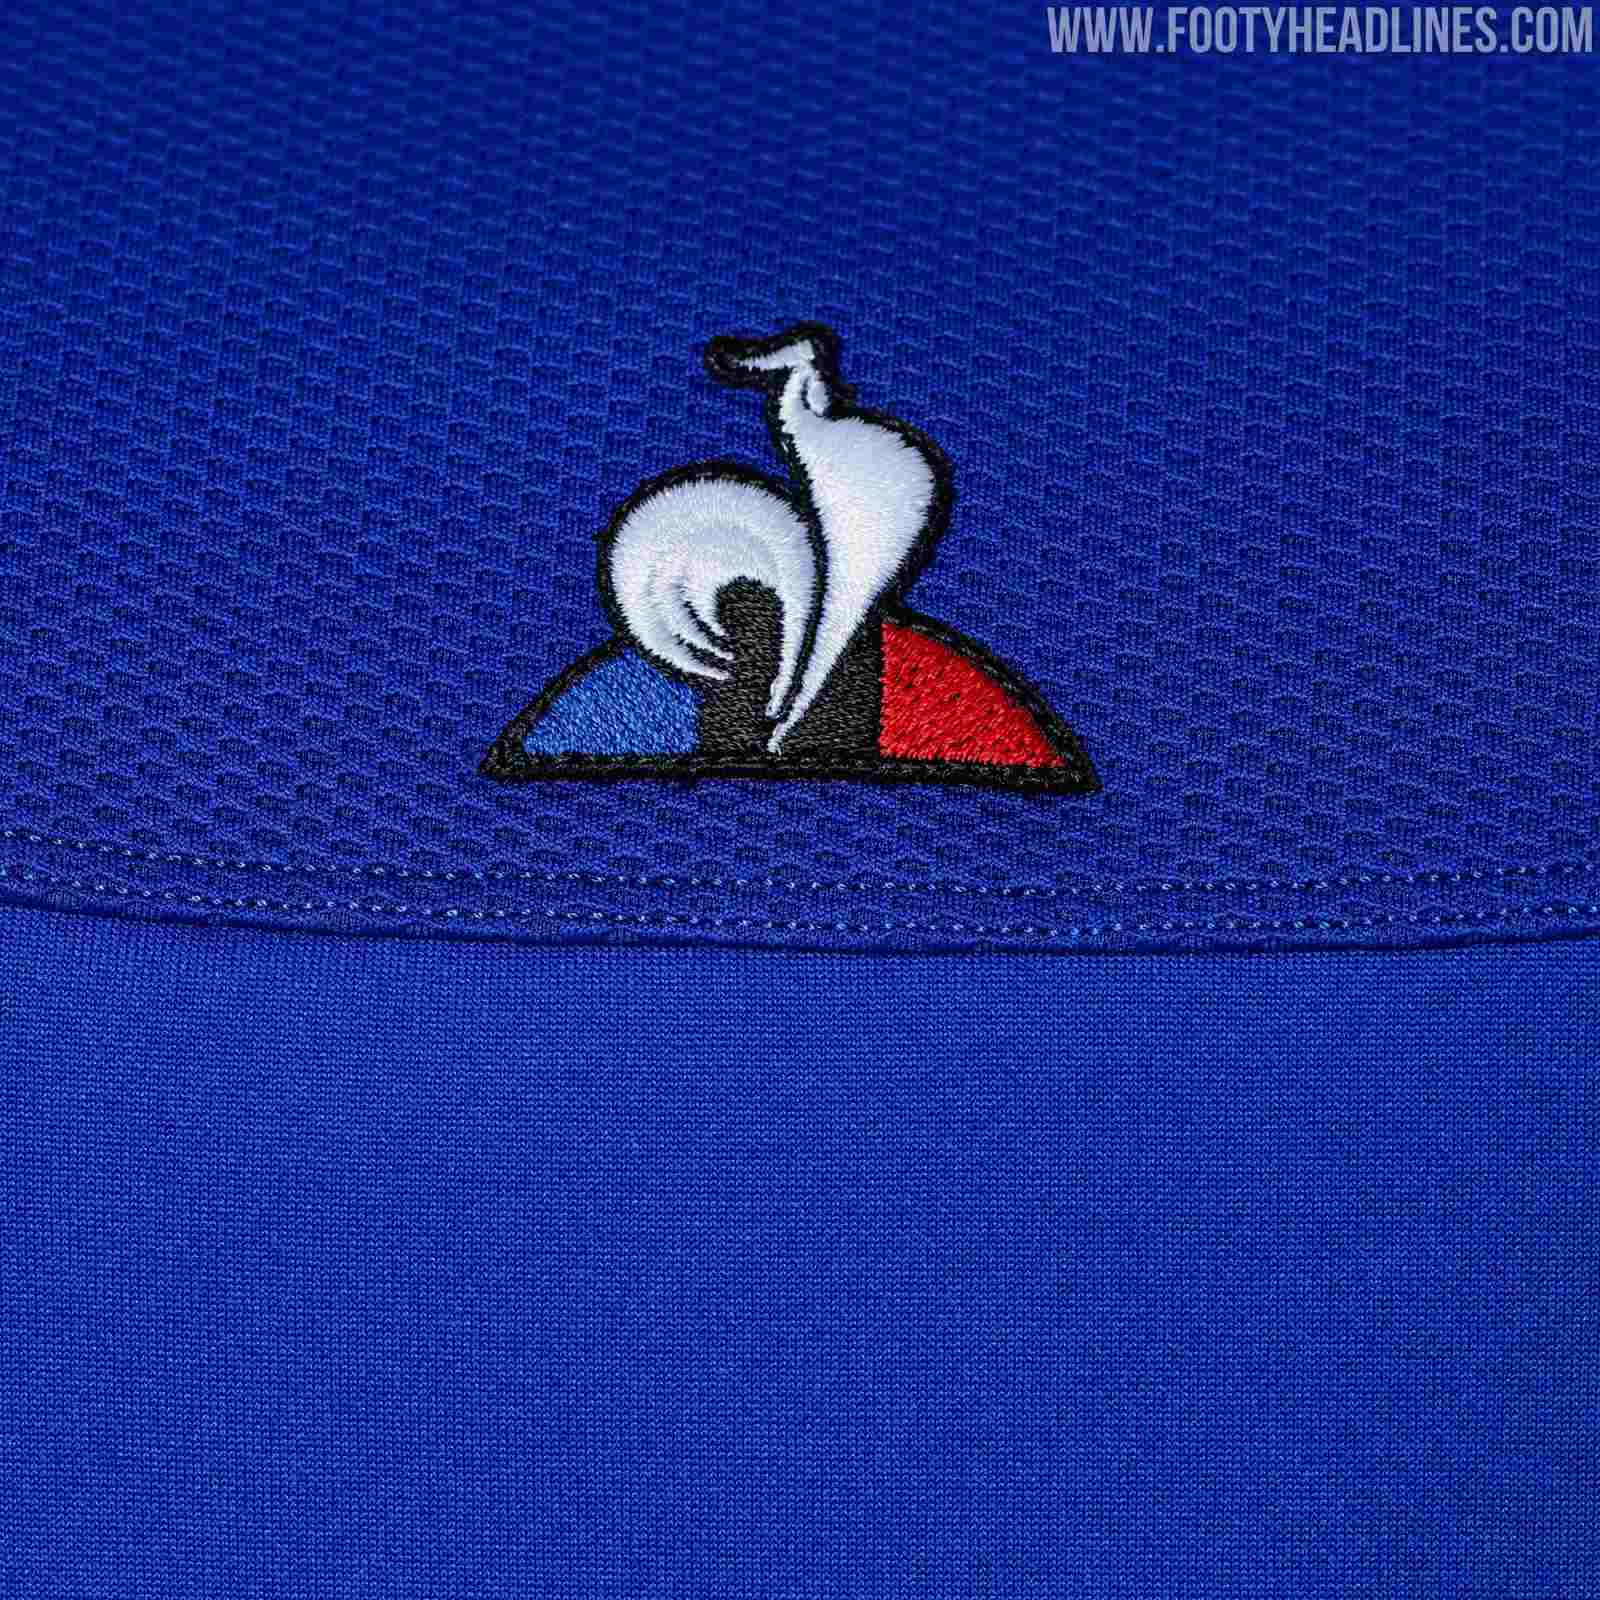 Better Than Nike? Stunning Le Coq Sportif France 2019 Rugby World Cup ...